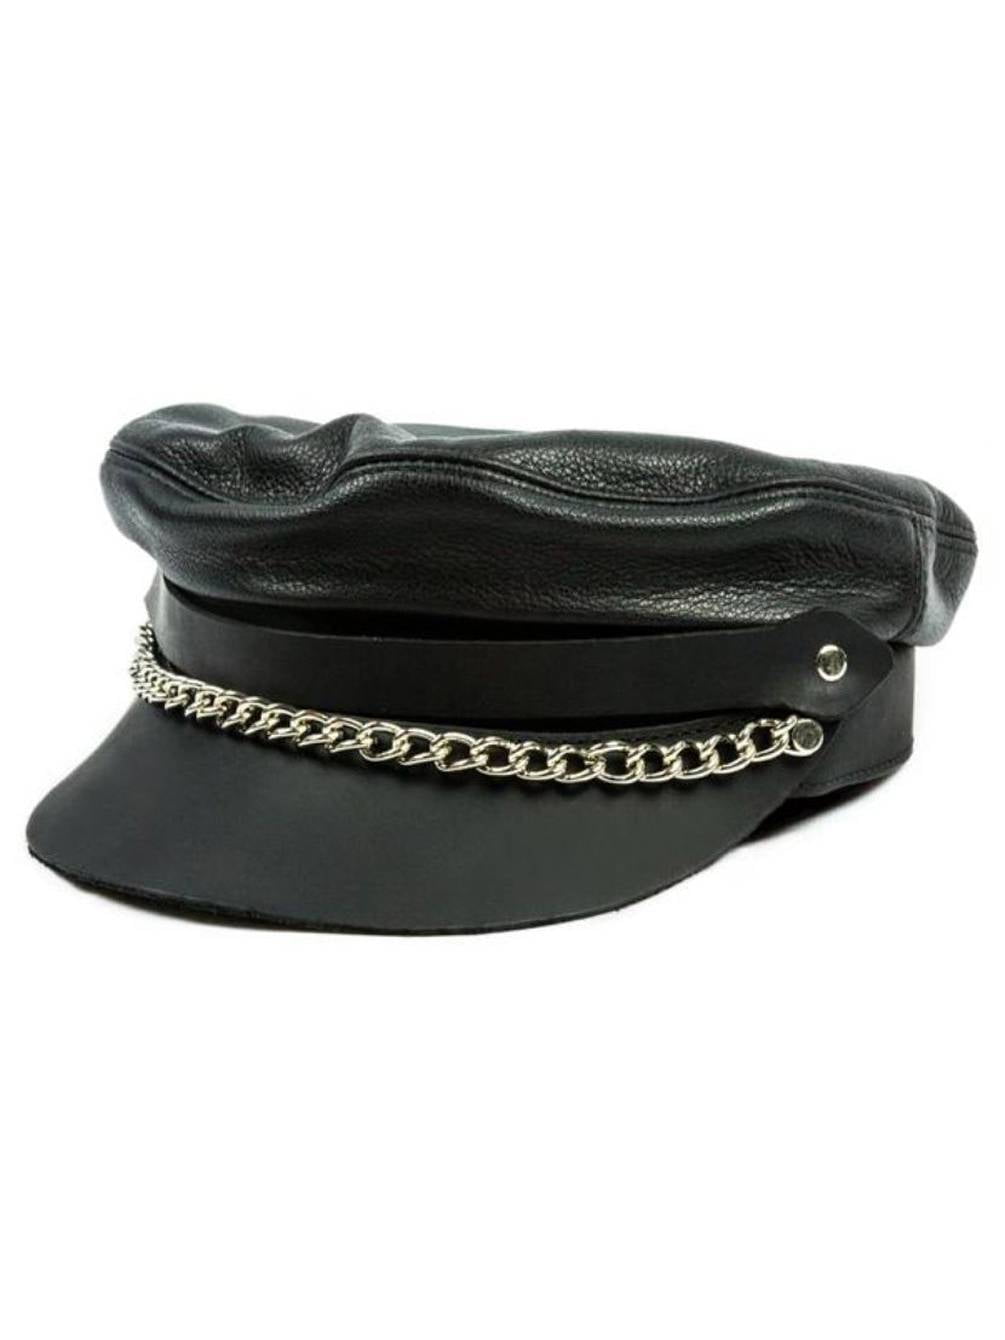 Biker Hat Black Satin Finish Cap With Silver Metal Chain Costume Acessory OS 